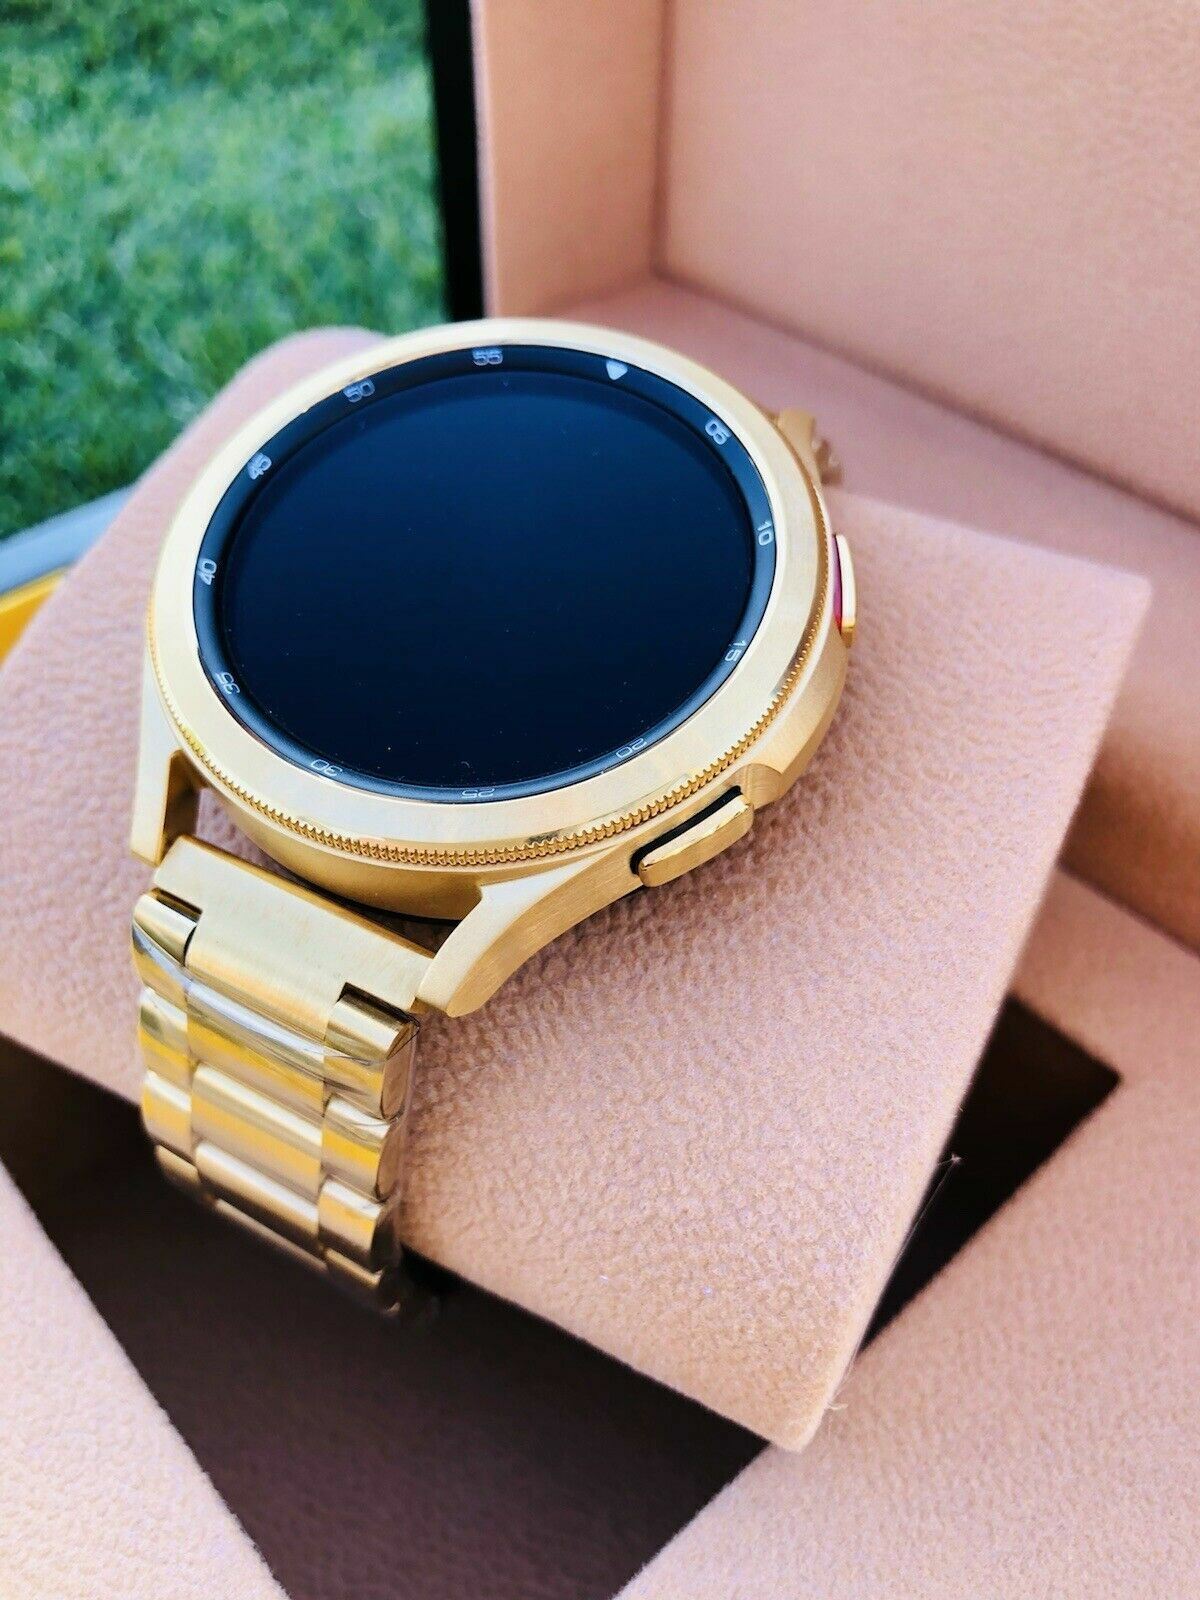 Custom 24k Gold Plated 42mm Samsung Galaxy Watch 4 POLISHED Gold Bezel Gray Band - image 3 of 11